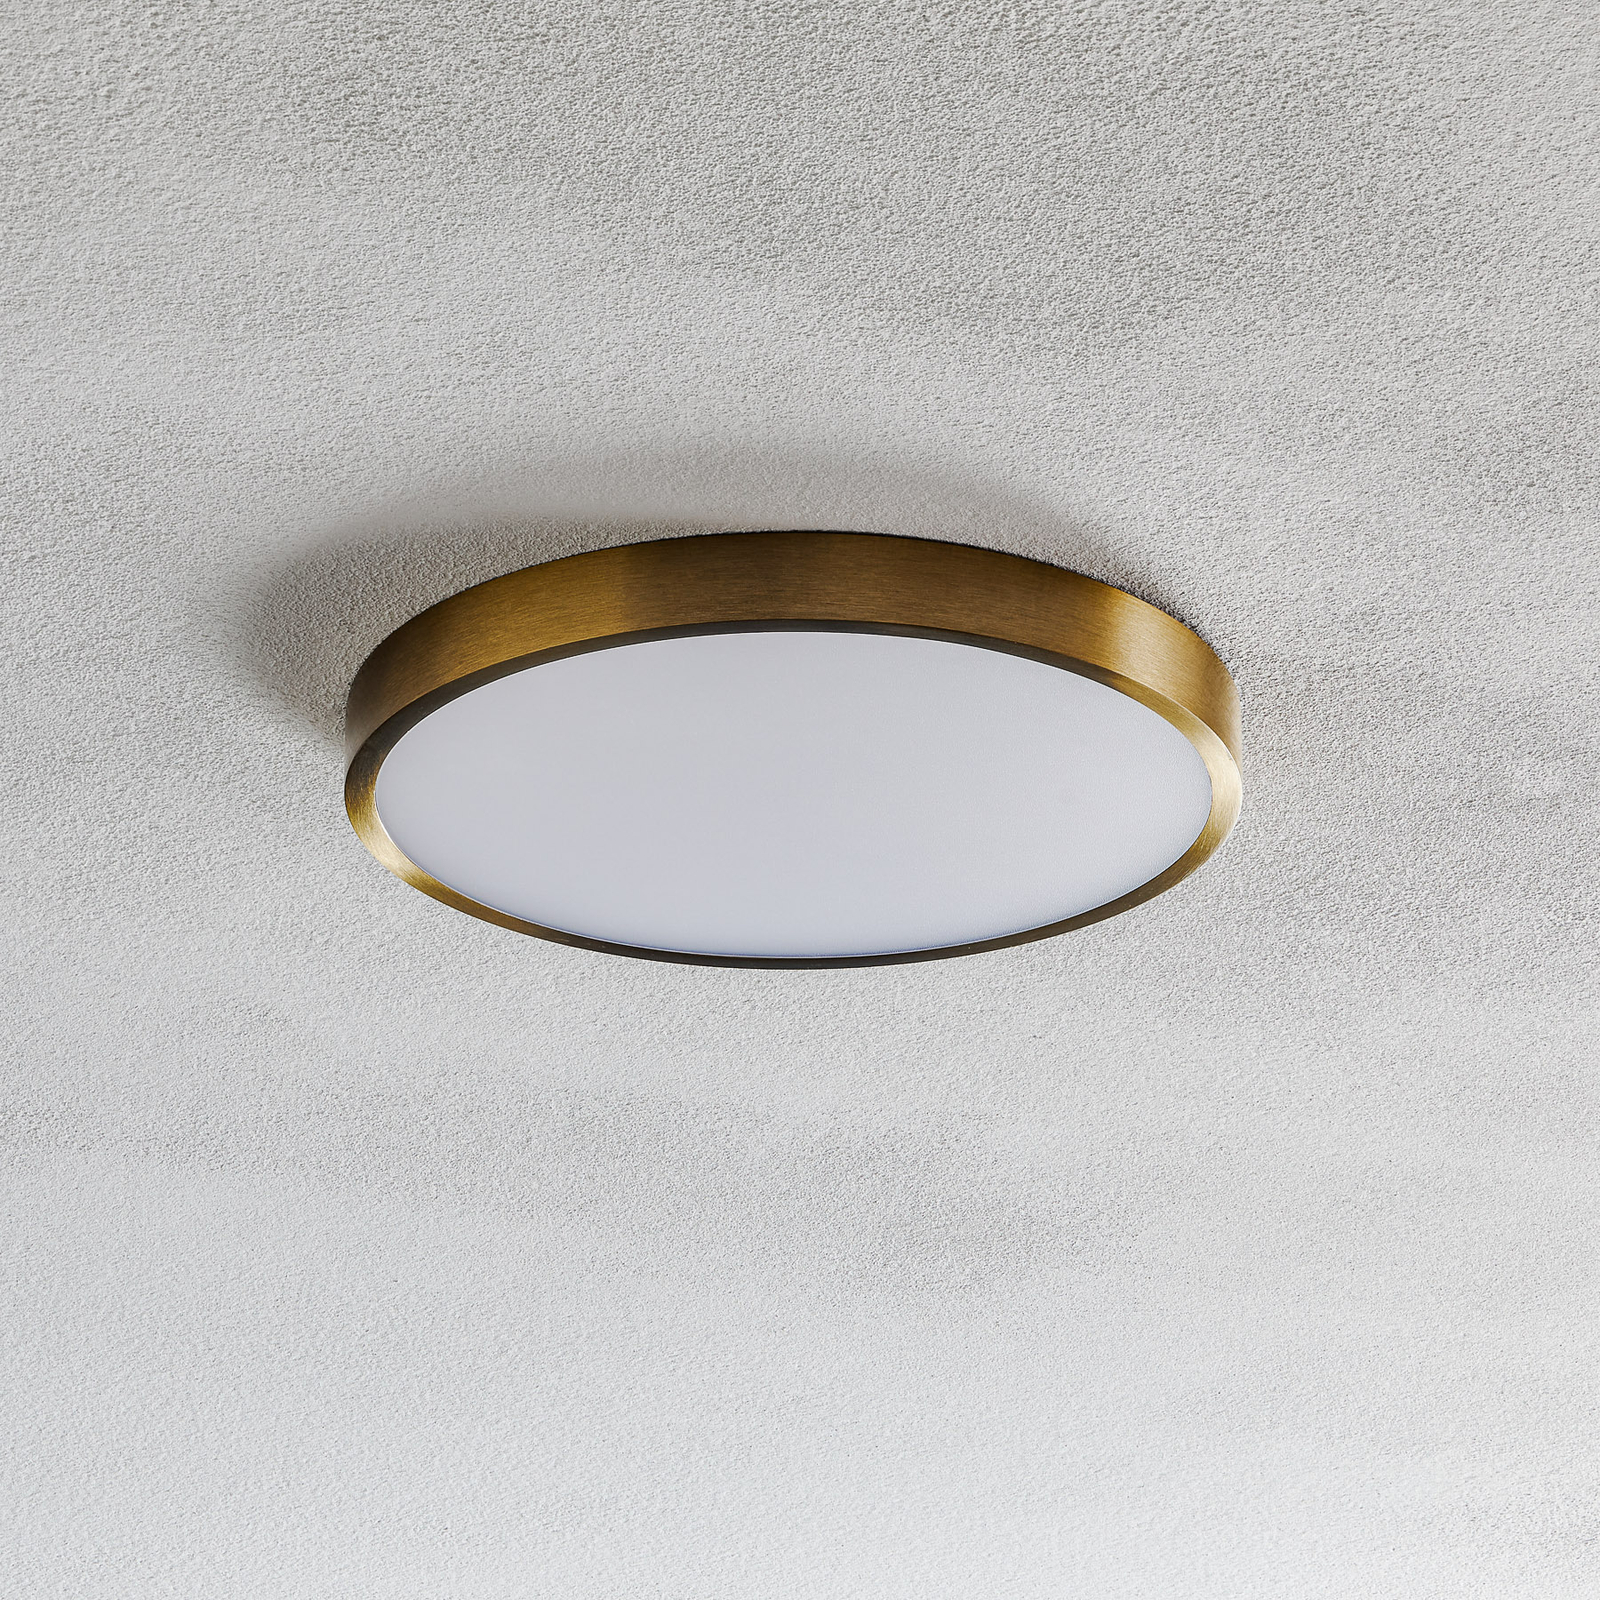 Bully LED ceiling light with patina look, Ø 24 cm